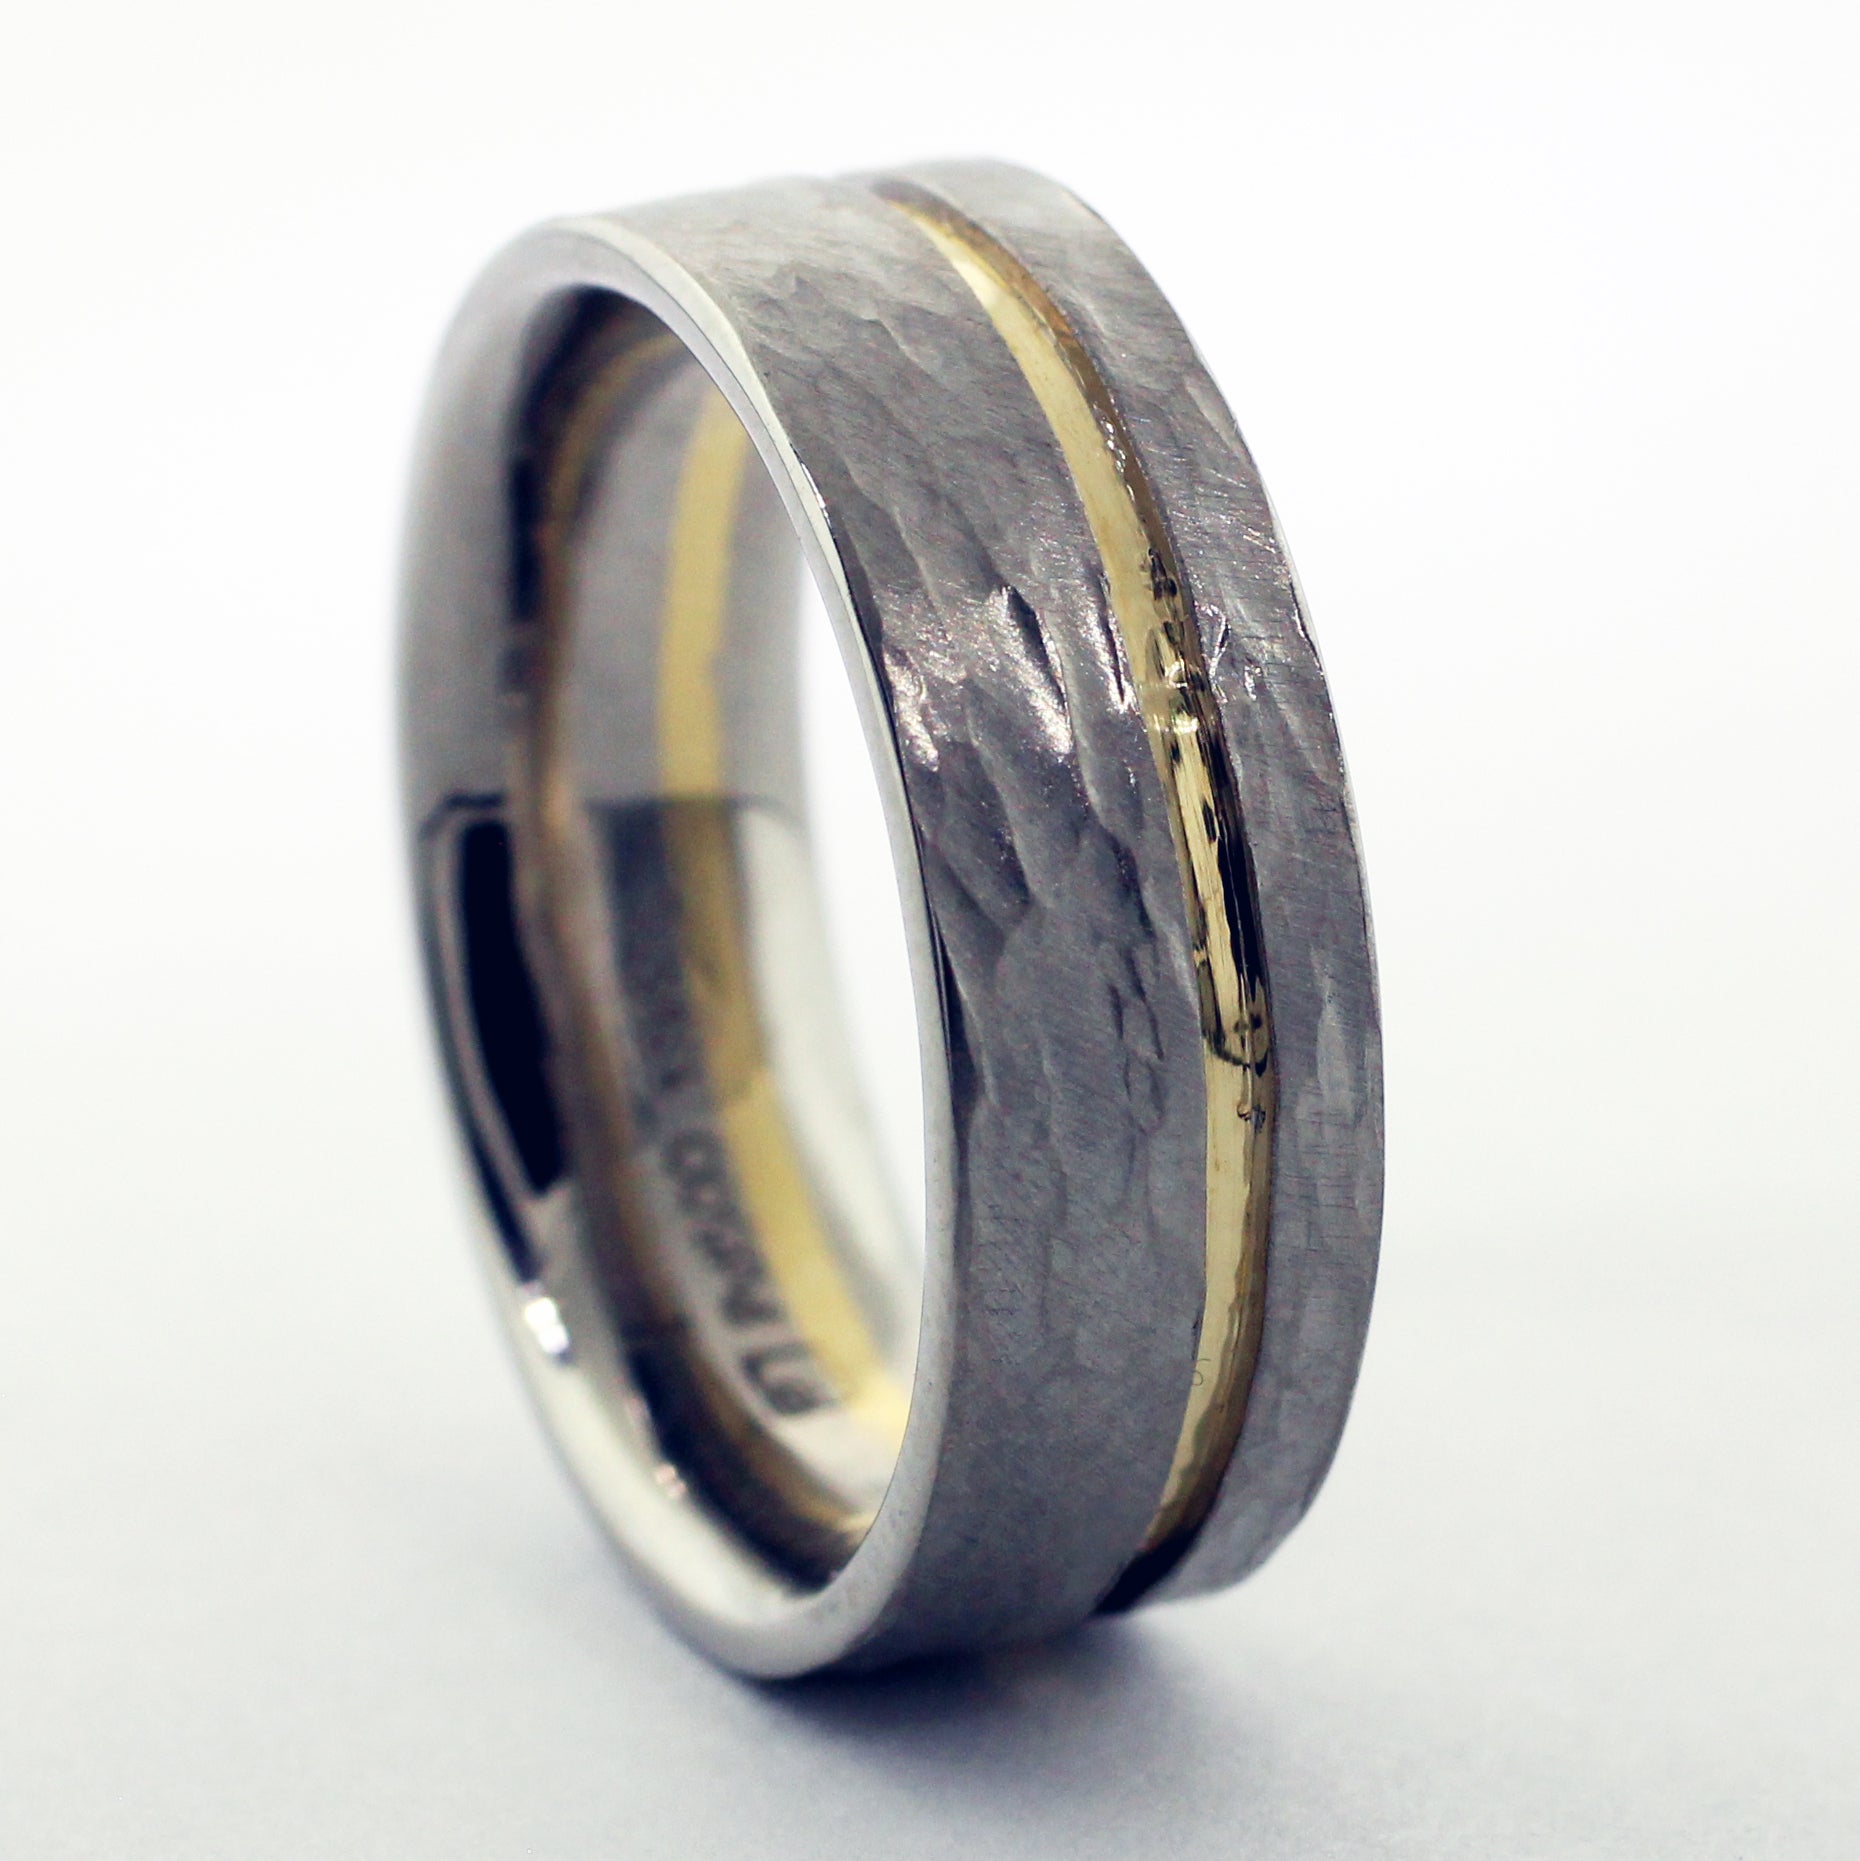 Crafted from palladium, renowned for its durability and sleek aesthetic, this men's wedding band features a warm 18ky gold recessed channel. The surface of the ring is adorned with a distinctive hammer texture, lending it a rugged yet refined appeal.